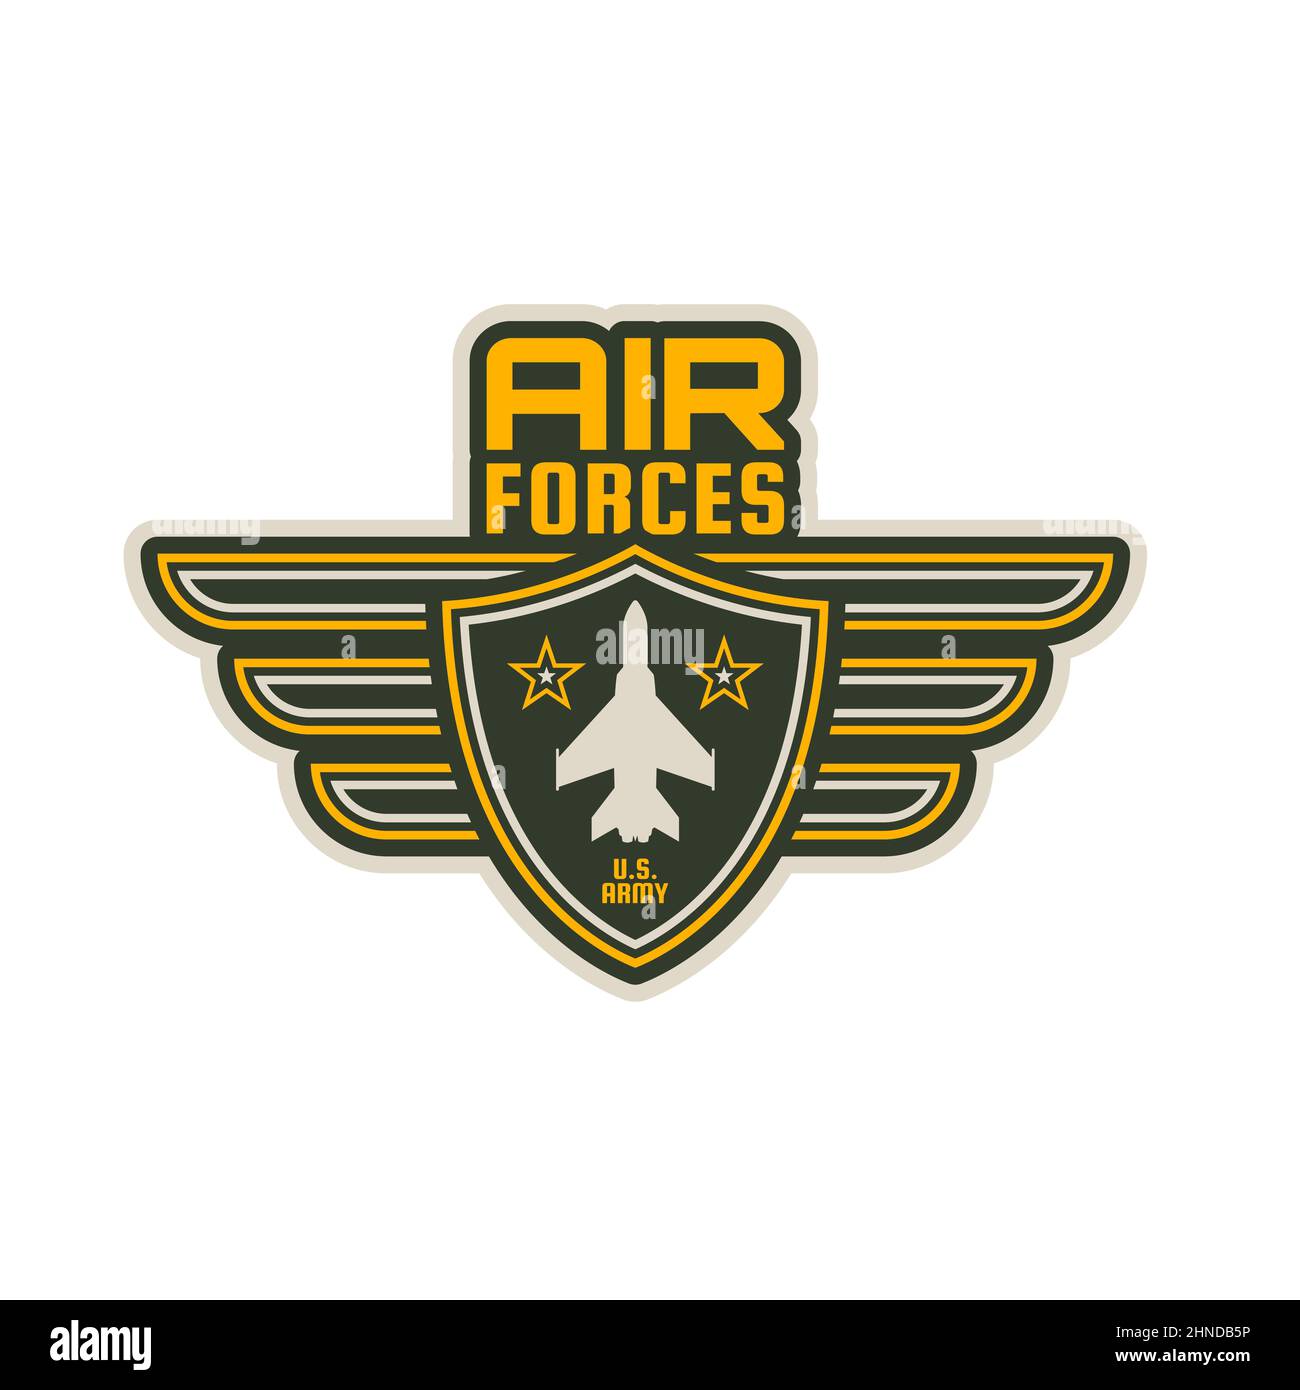 Air forces patch vector icon with wings of military aircraft, plane and stars on shield. Army or navy aviation heraldic badge or symbol design for arm Stock Vector